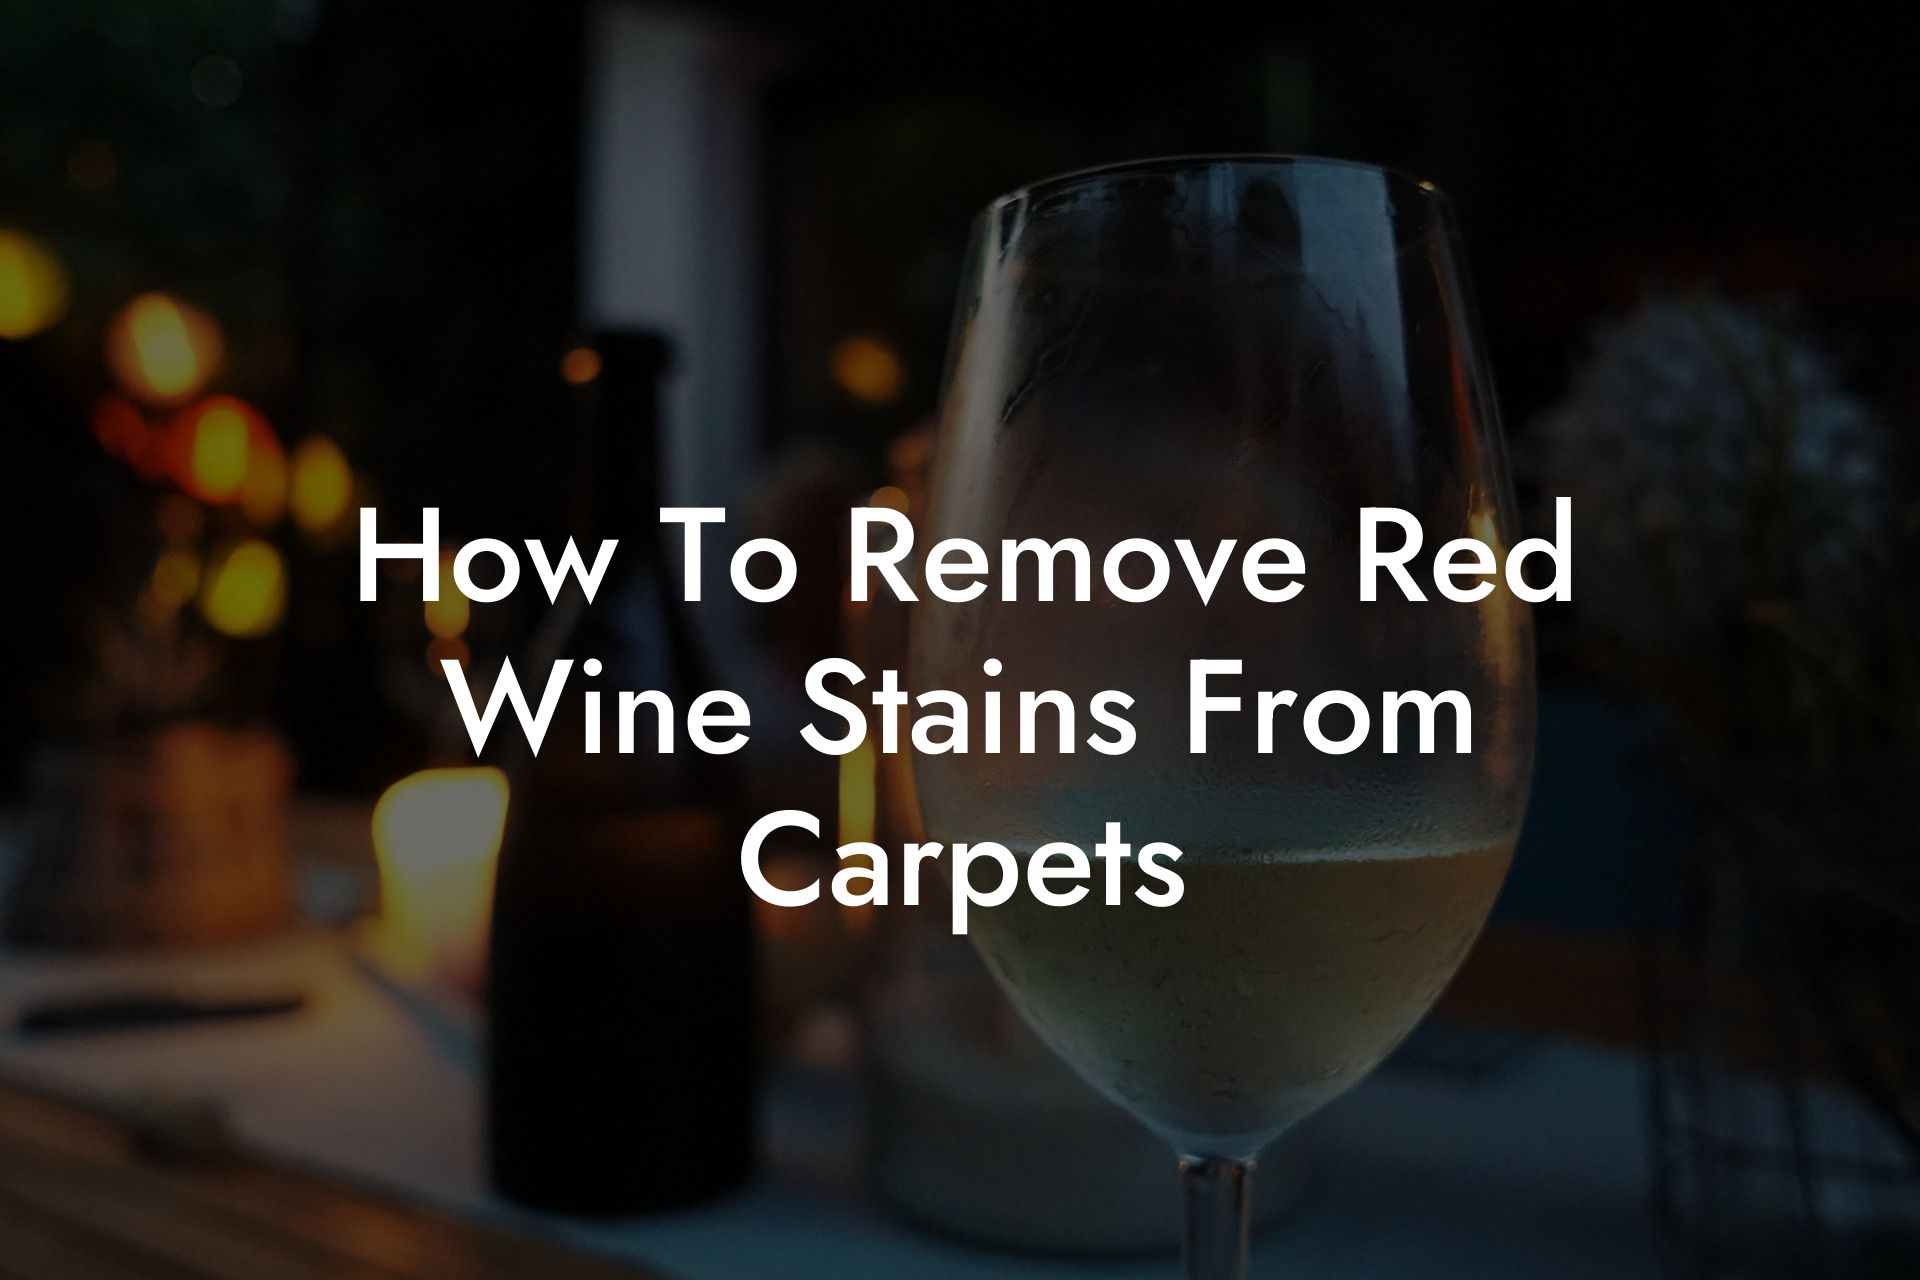 How To Remove Red Wine Stains From Carpets